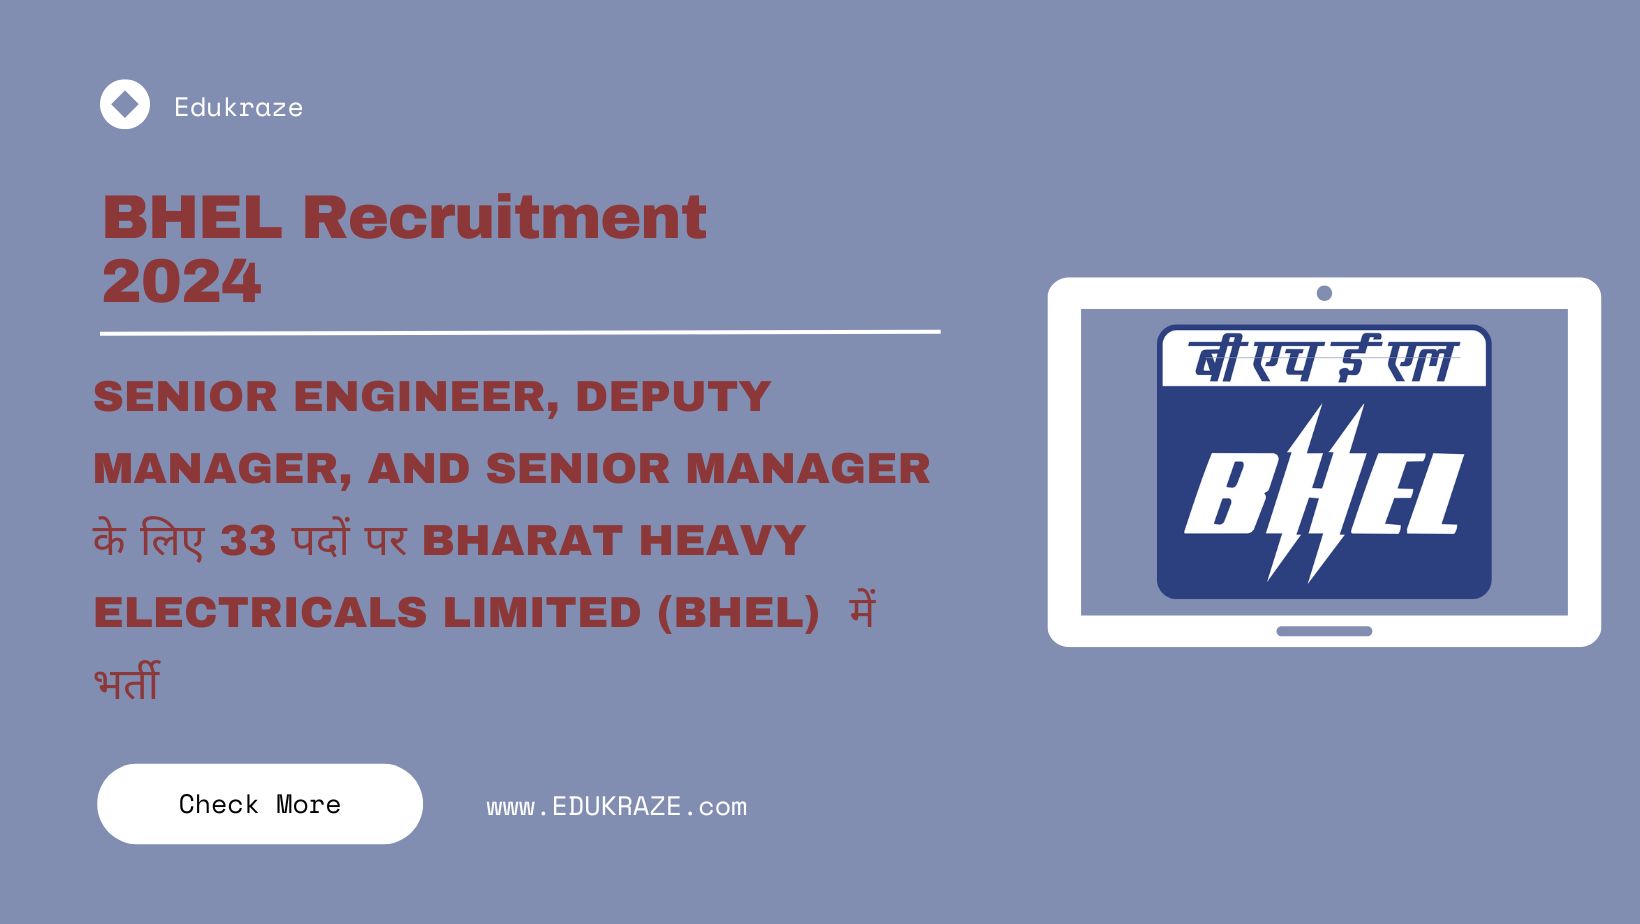 BHEL Recruitment 2024: Engineer, Manager and Other Posts with Salary Up to Rs. 260,000